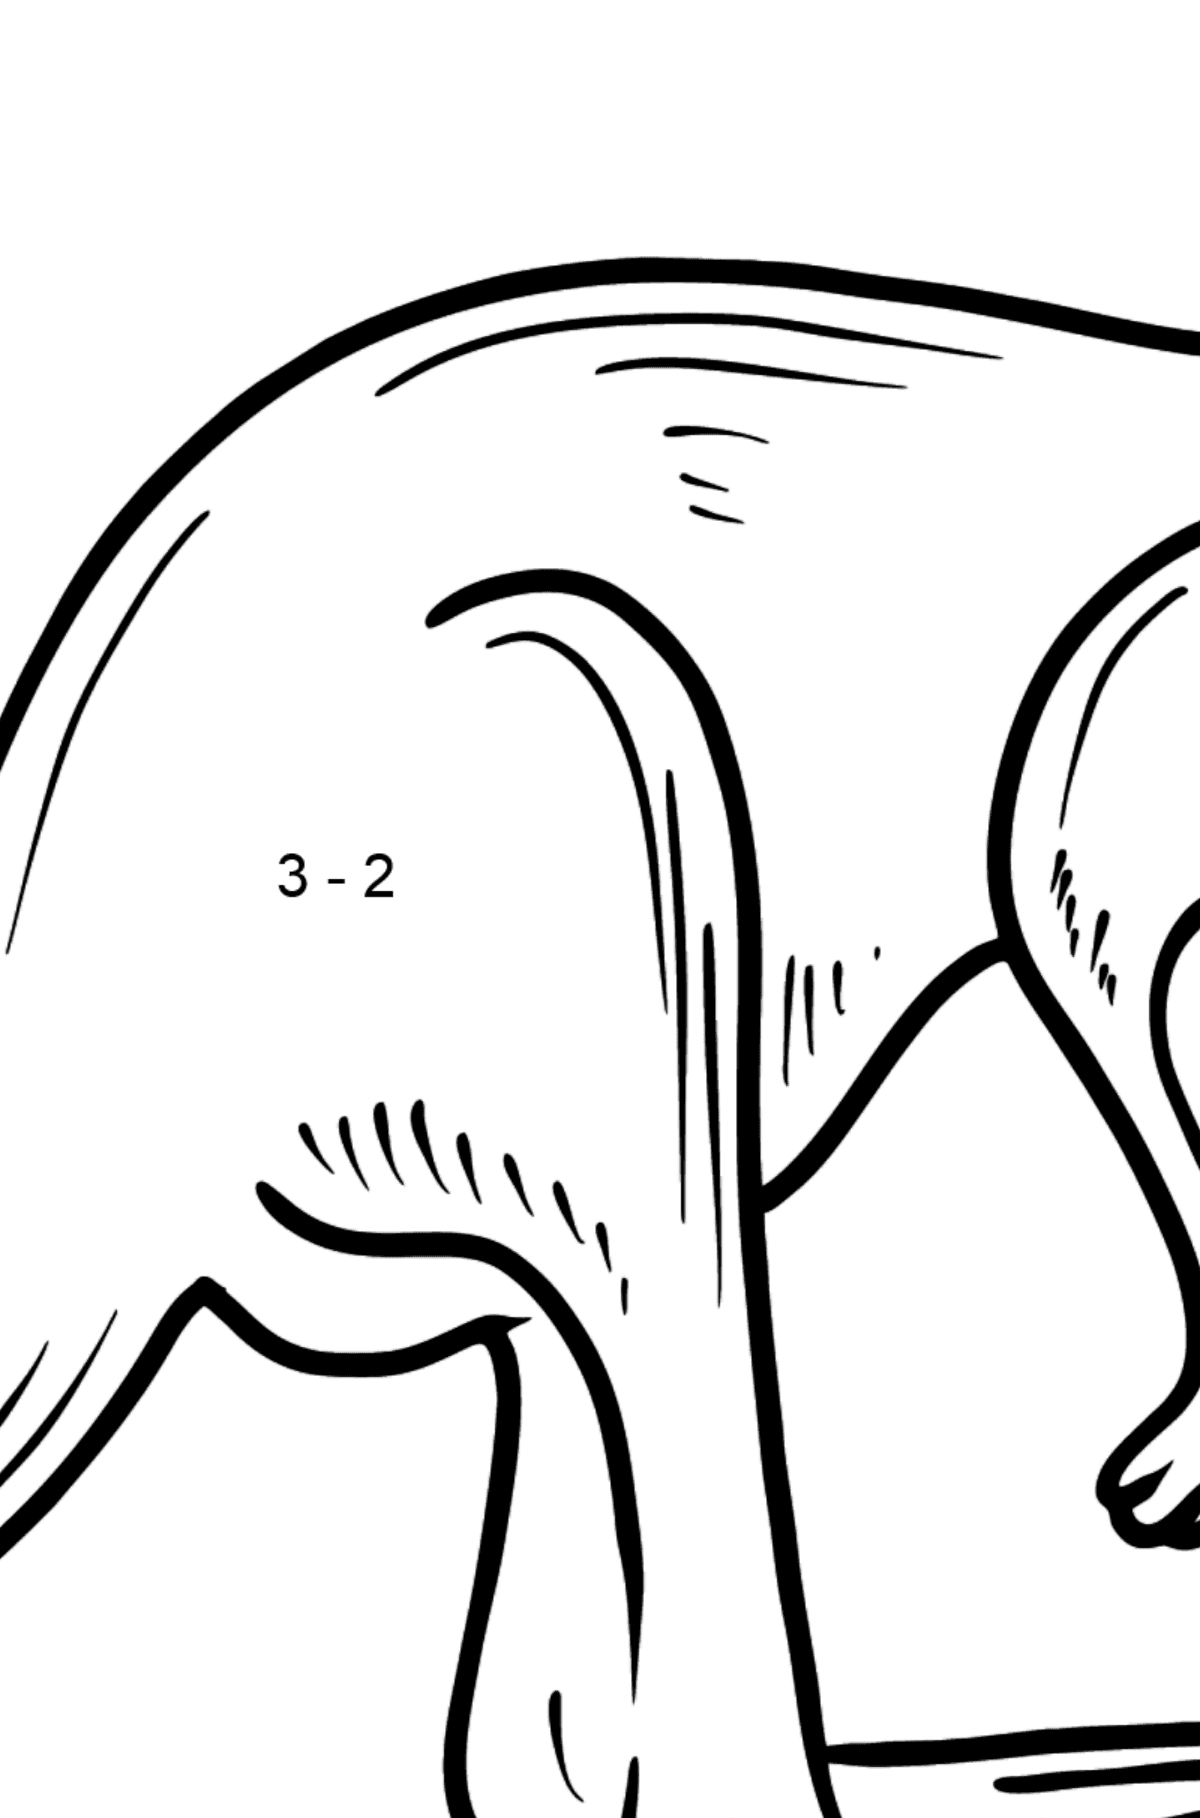 Kangaroo coloring page - Math Coloring - Subtraction for Kids